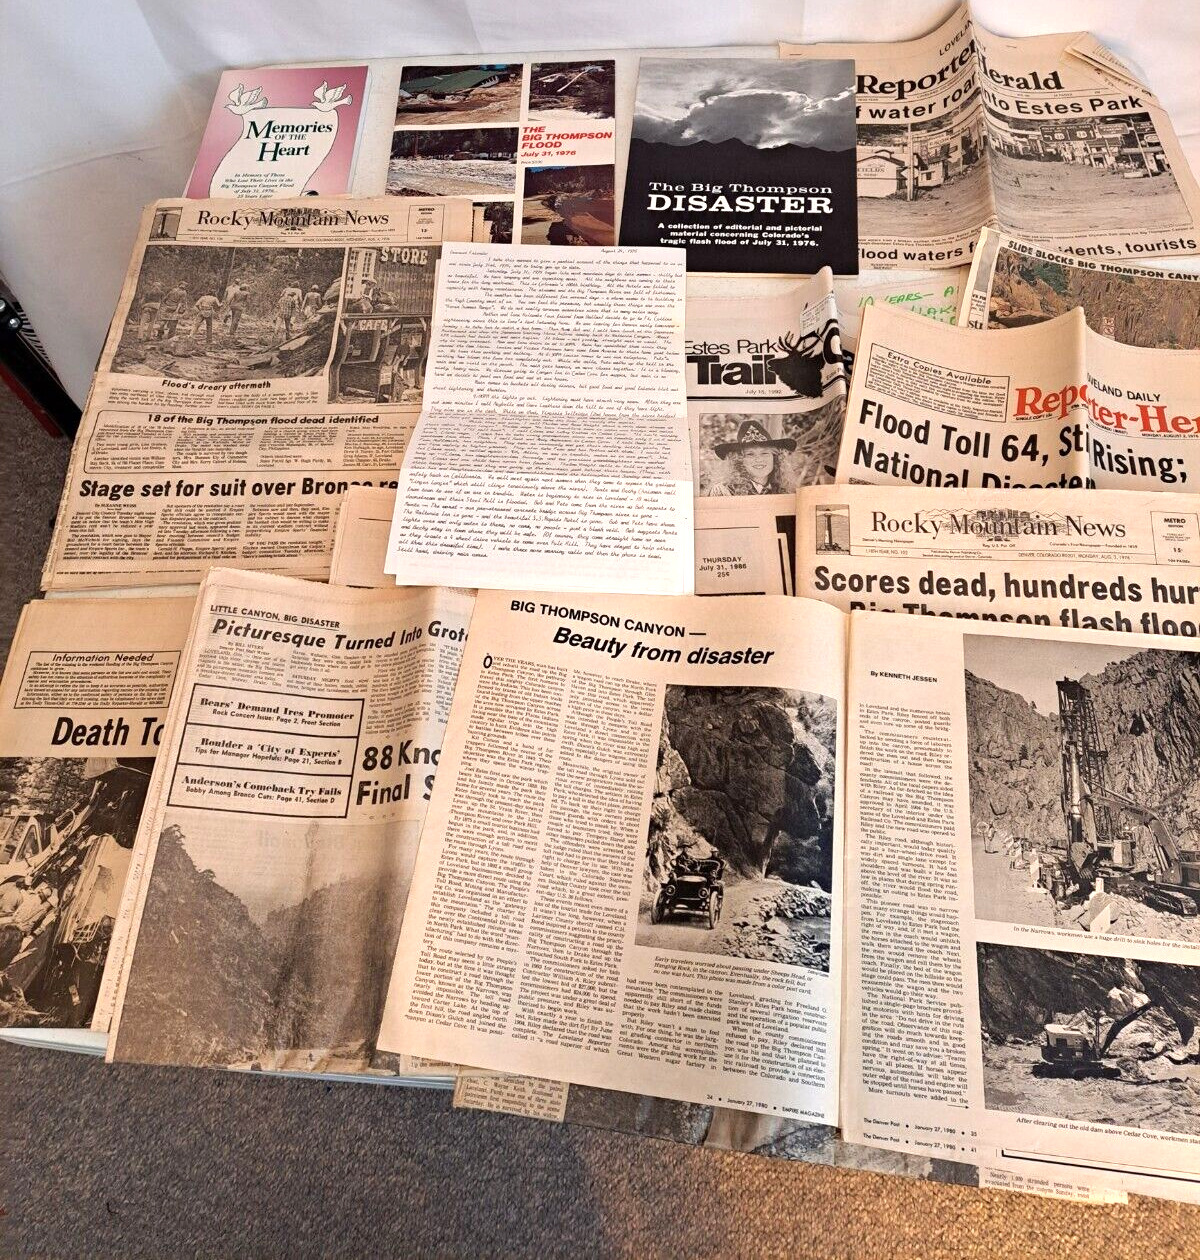 Lot of Big Thompson Canyon, Colorado Flood Disaster Newspapers 1976 Books,Letter